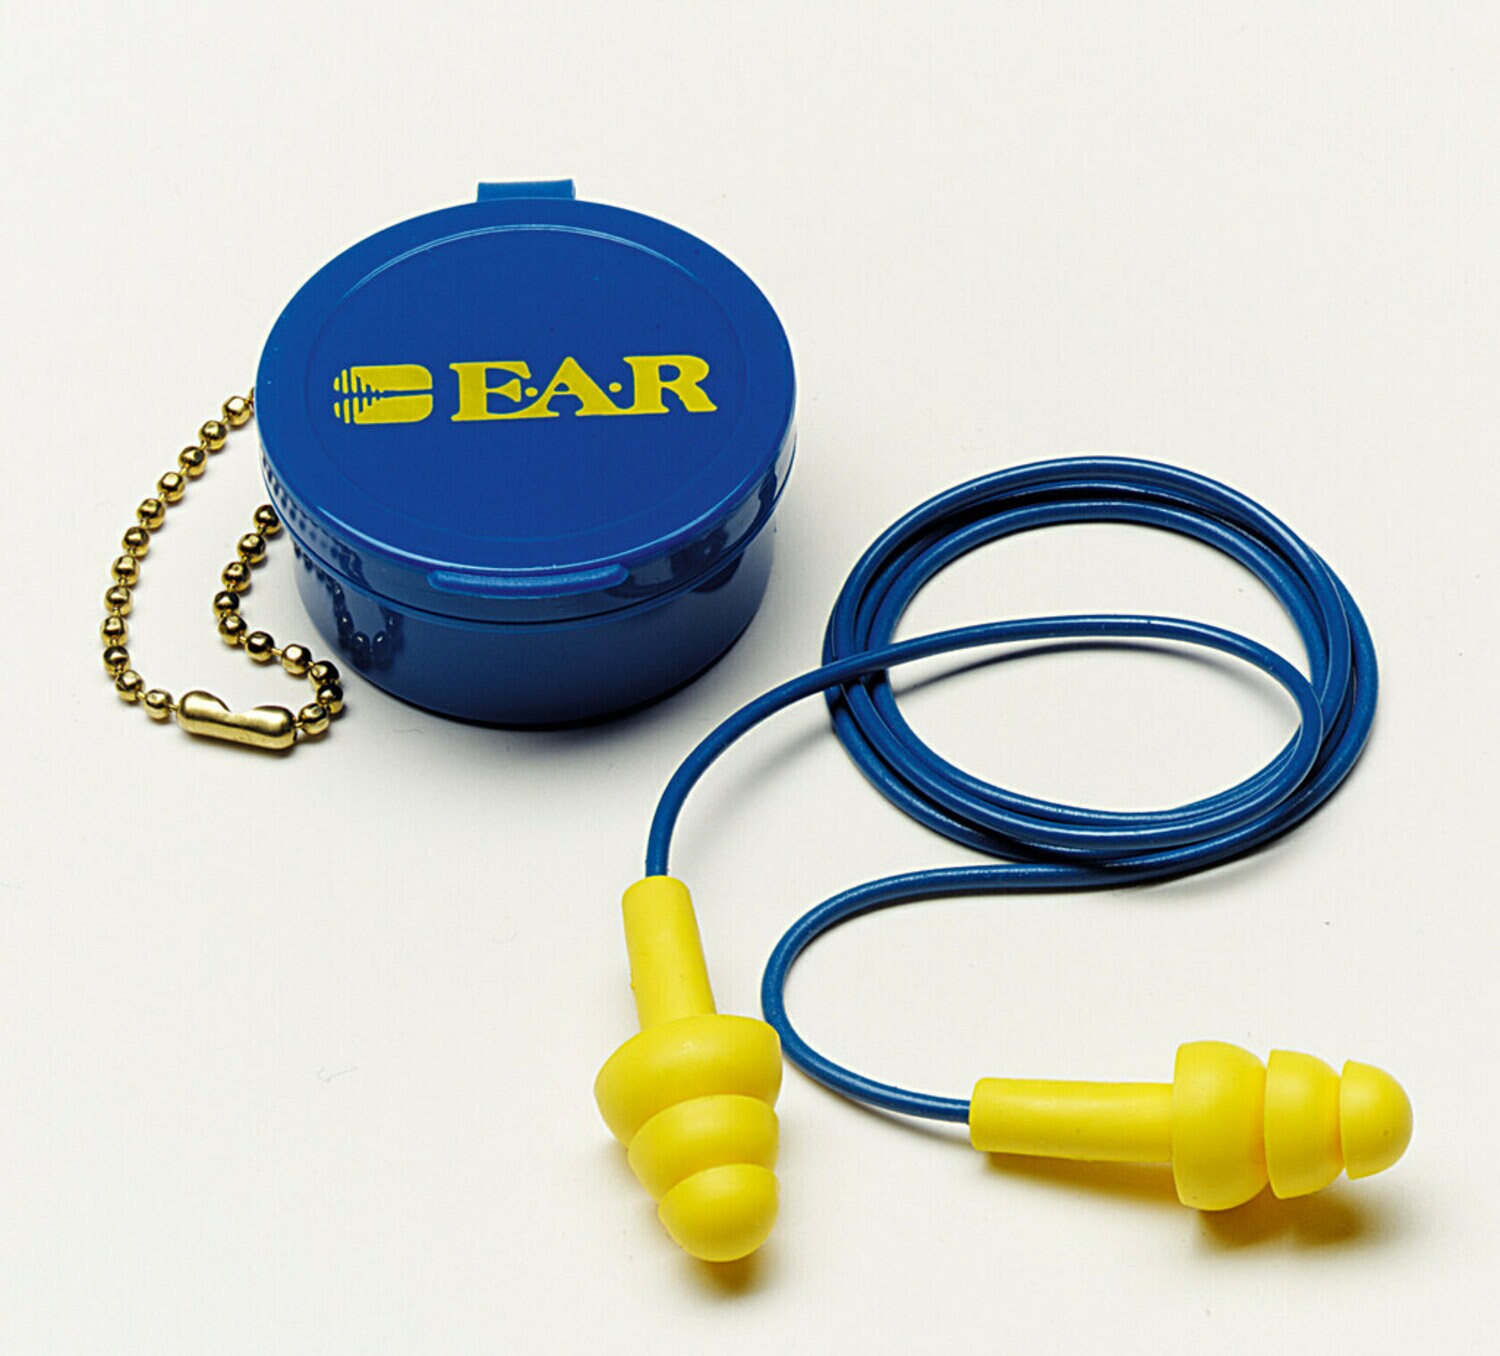 7000002322 - 3M E-A-R UltraFit Earplugs 340-4002, Corded, Carrying Case, 200
Pair/Case